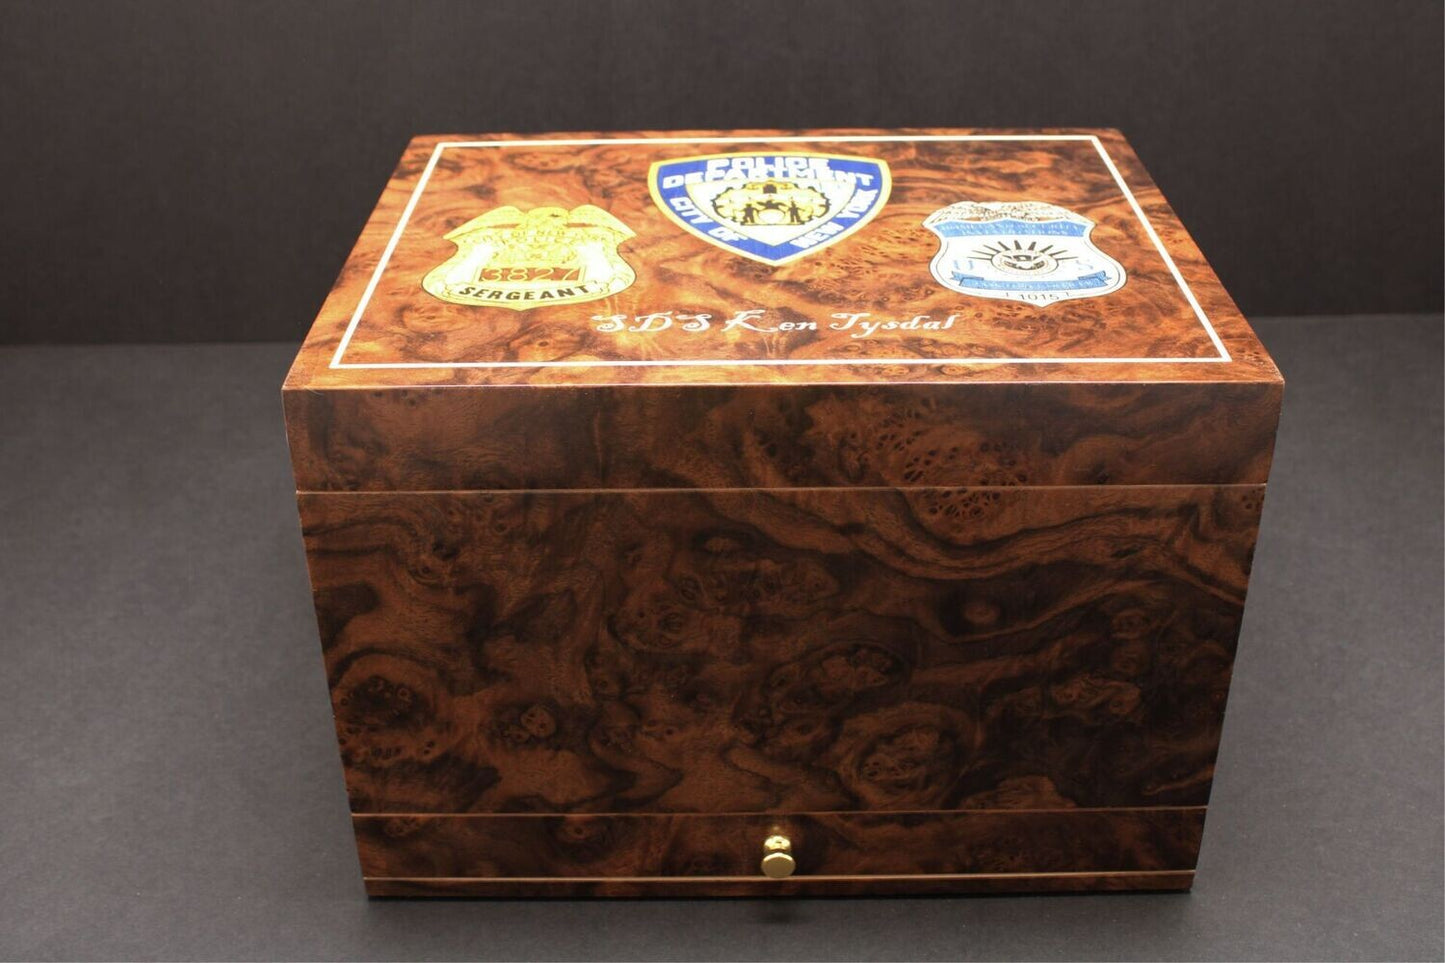 75-Count  Custom Humidor (with Drawer). Made in the U.S.